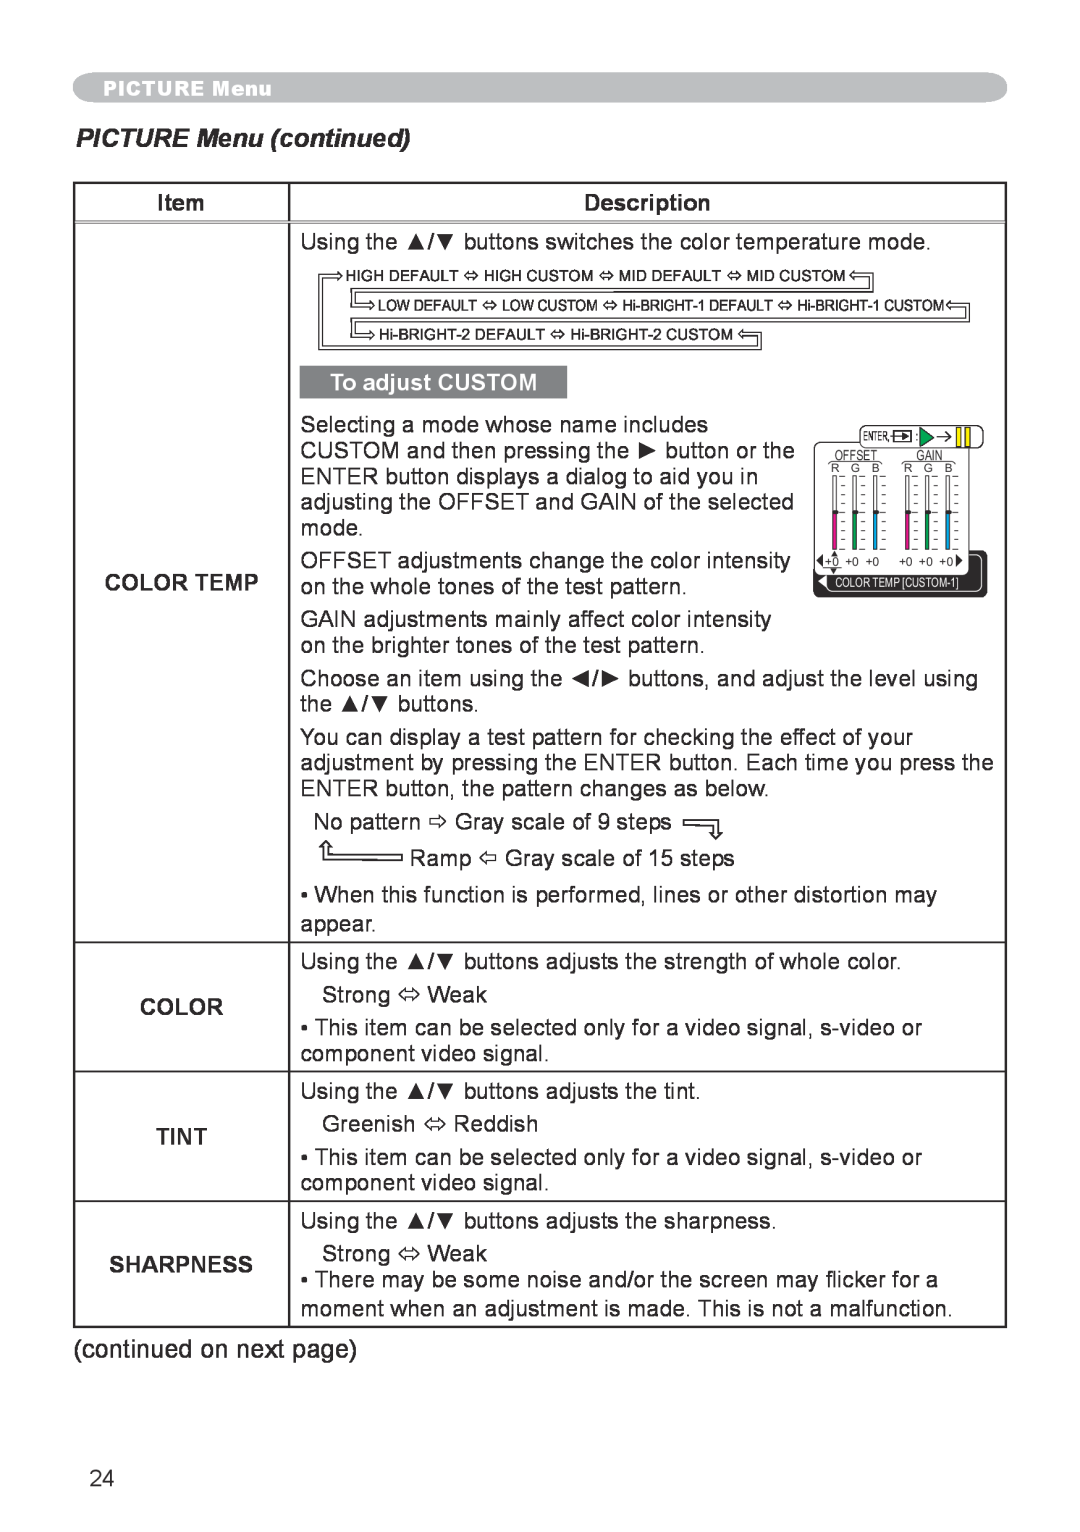 Apple CPX5, CPX1 user manual PICTURE Menu continued, Description, To adjust CUSTOM, Color, Tint, Sharpness 